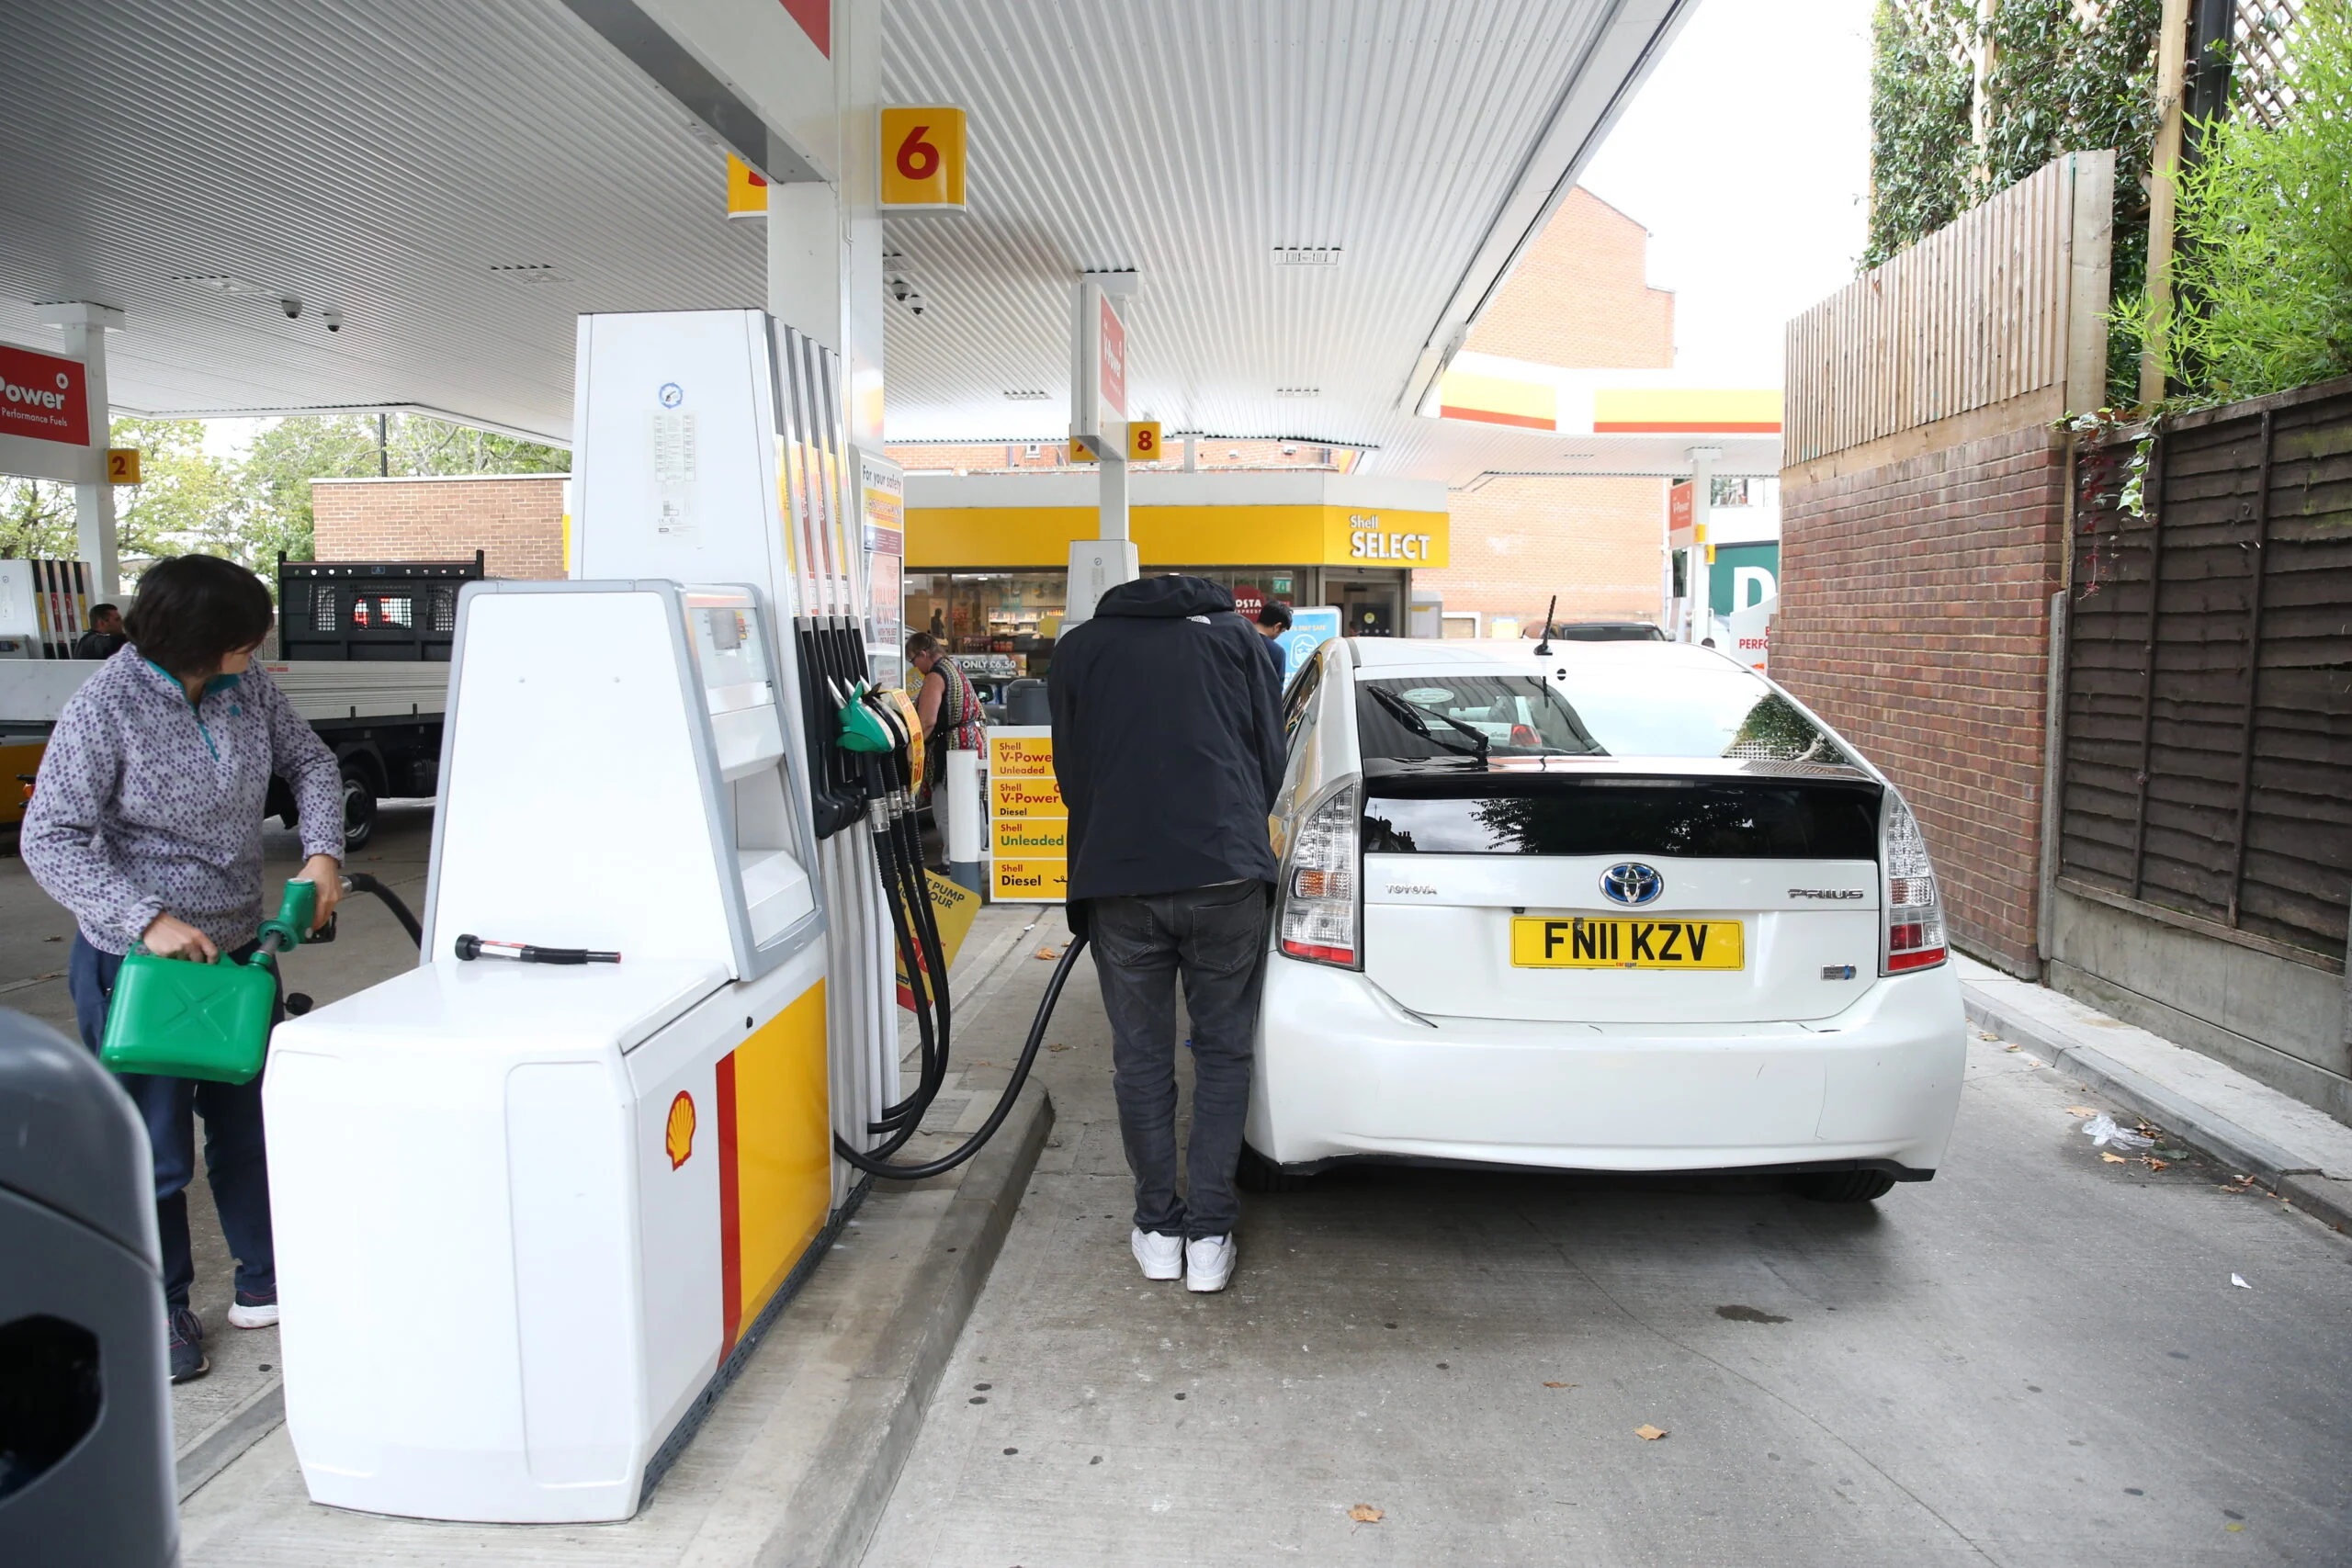 Fuel shortages at petrol stations in London